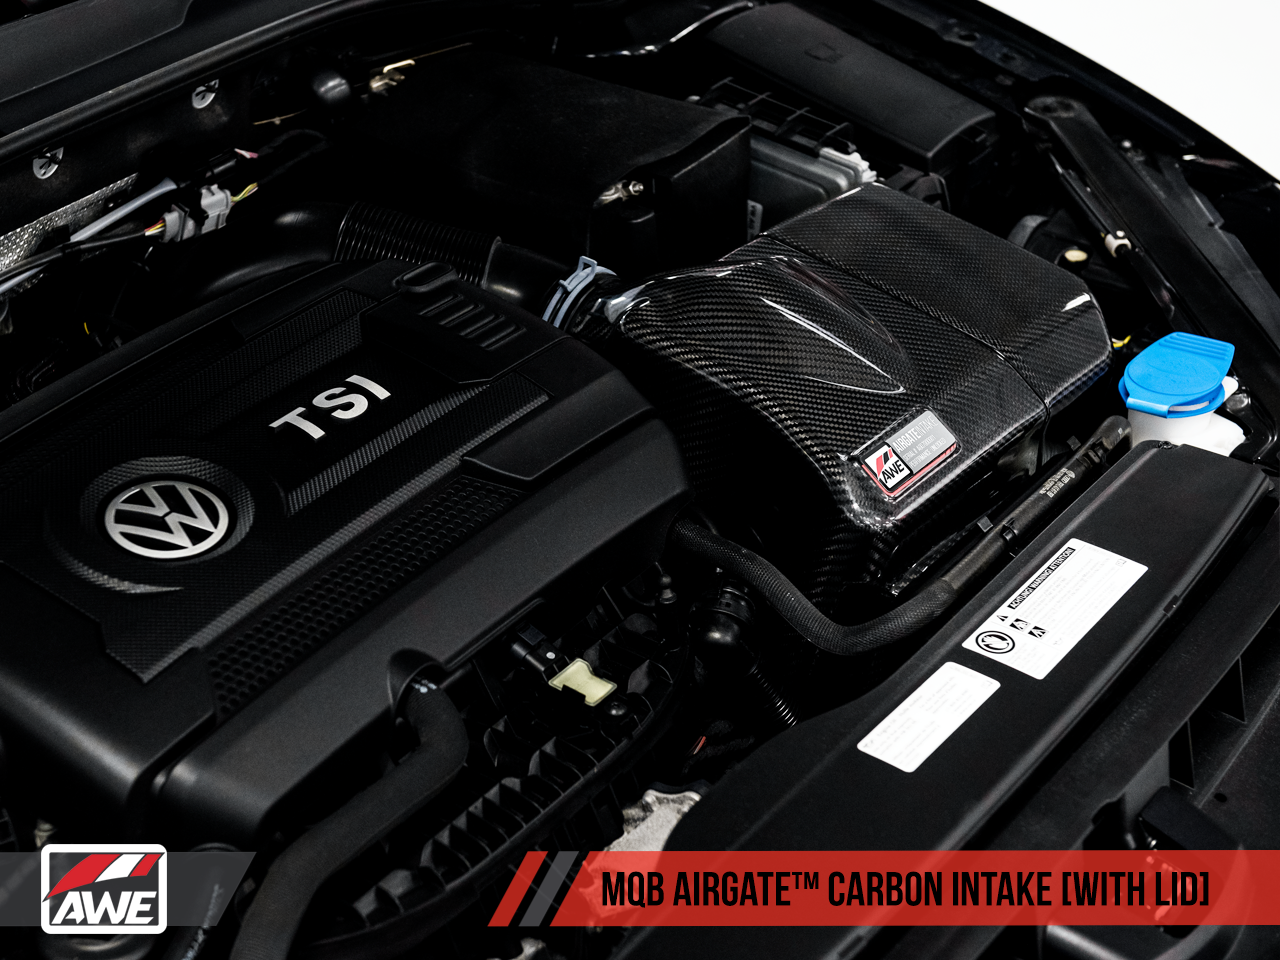 AWE AirGate™ Carbon Intake for Audi / VW MQB (1.8T / 2.0T) - With Lid - 0